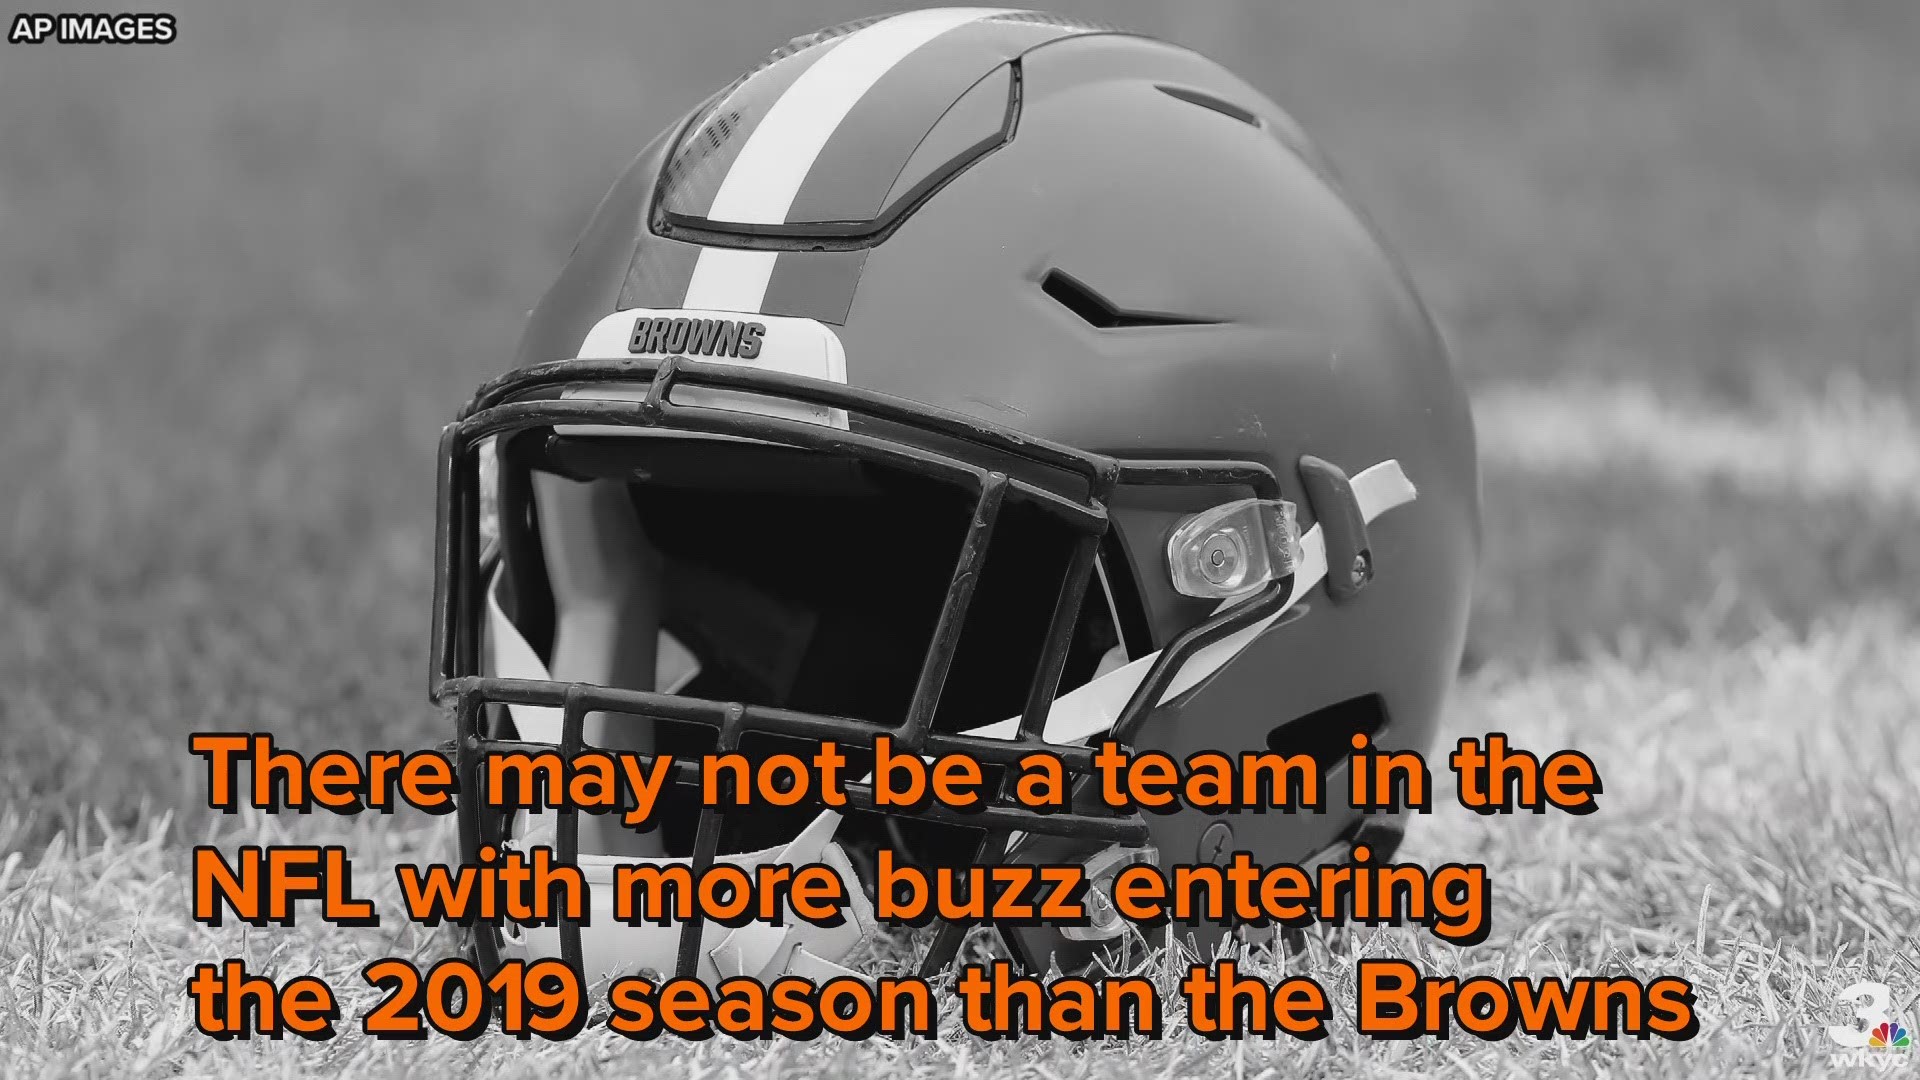 Speaking at the 'Rock the Draft' event, Cleveland Browns general manager John Dorsey attempted to temper expectations for his team's 2019 season.